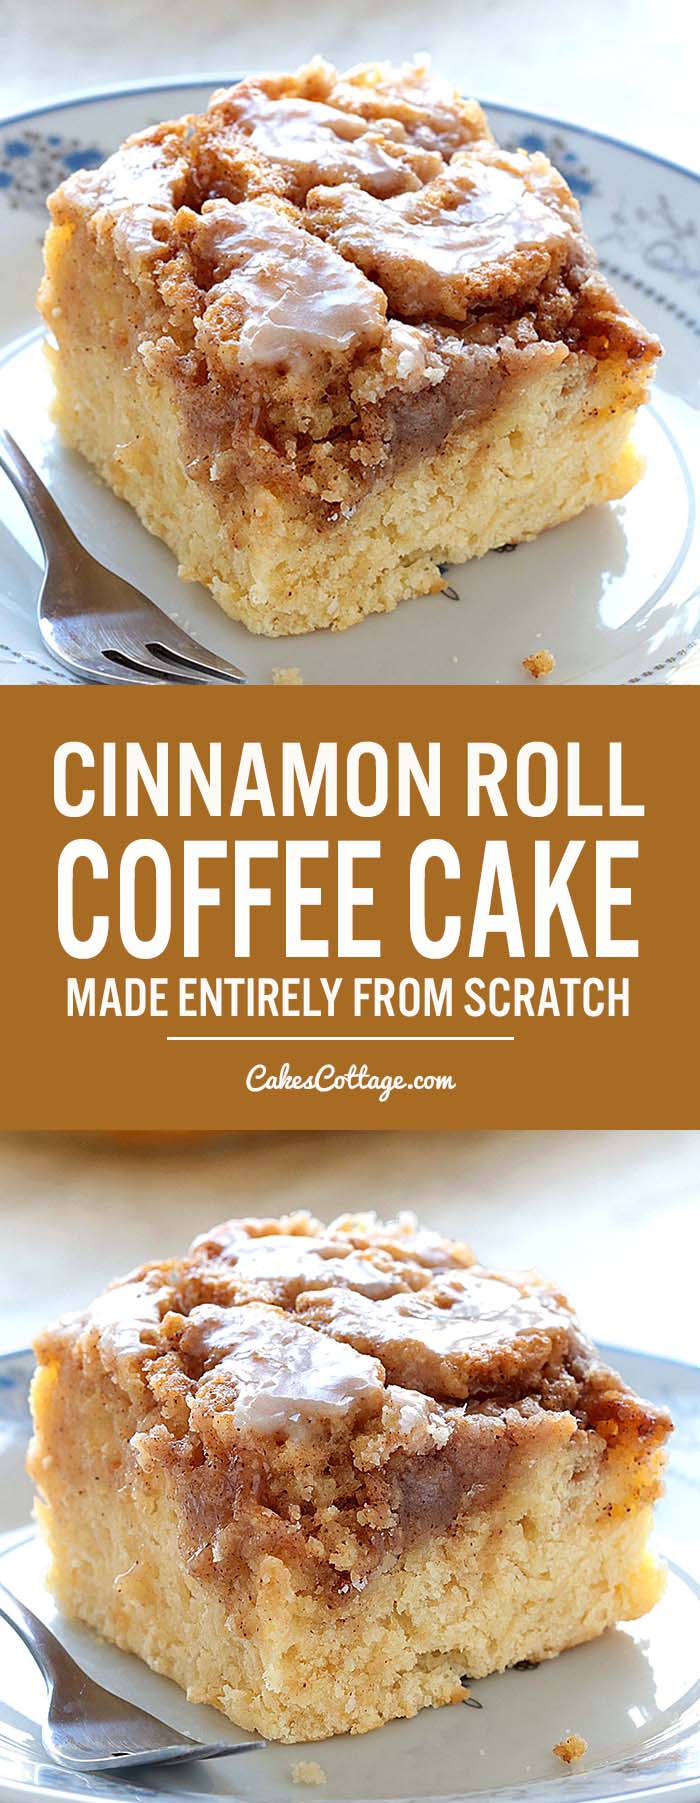 Easy Cinnamon Roll Coffee Cake is simple and quick recipe for delicious, homemade coffee cake from scratch, with ingredients that you already have in pantry.